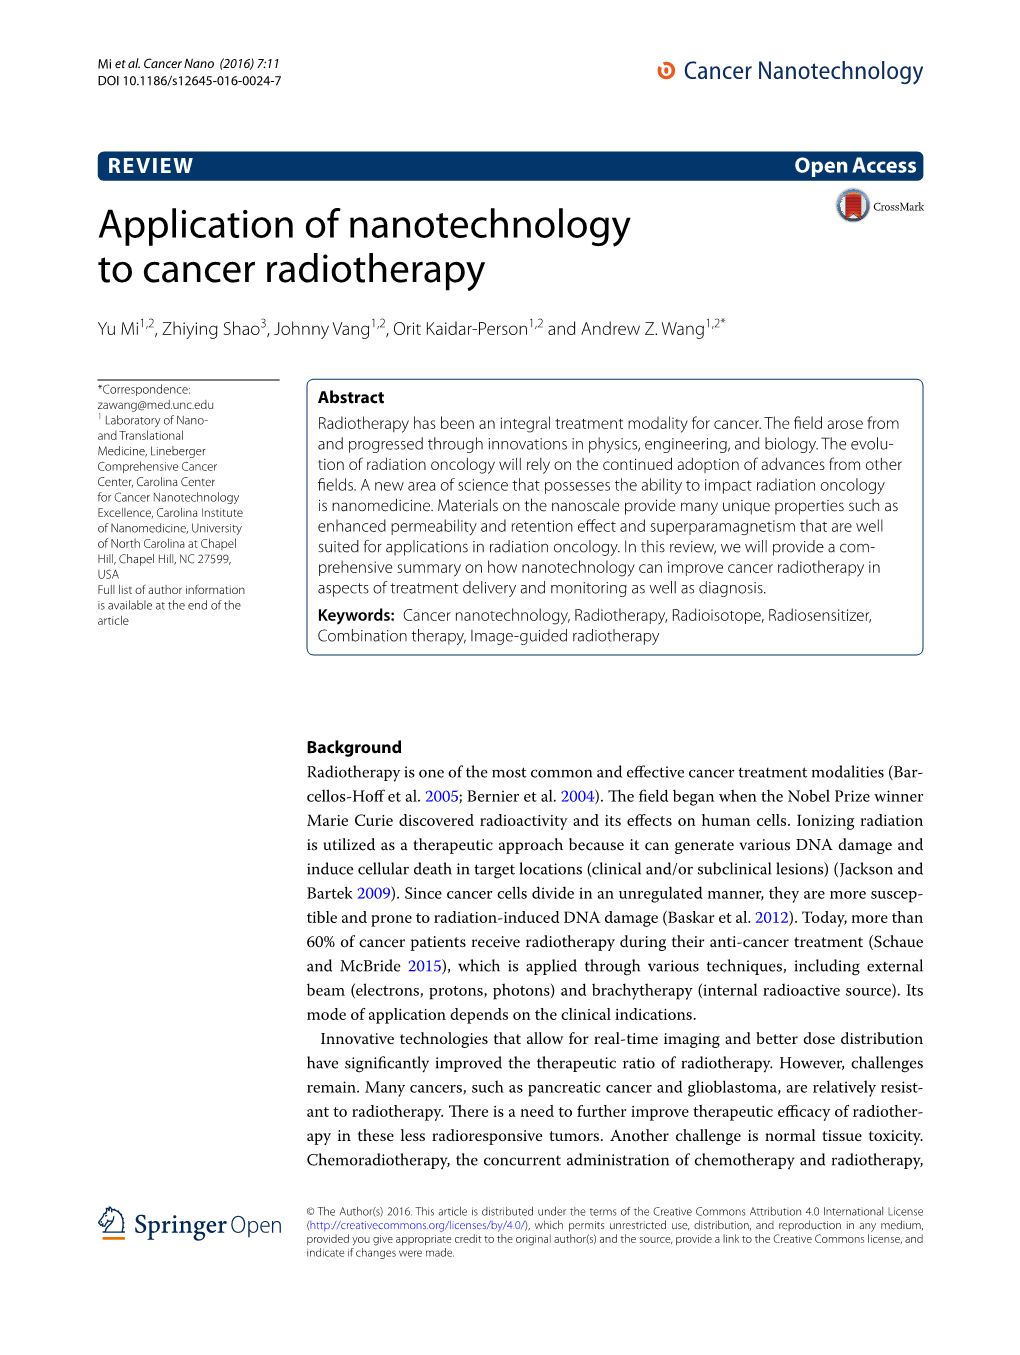 Application of Nanotechnology to Cancer Radiotherapy